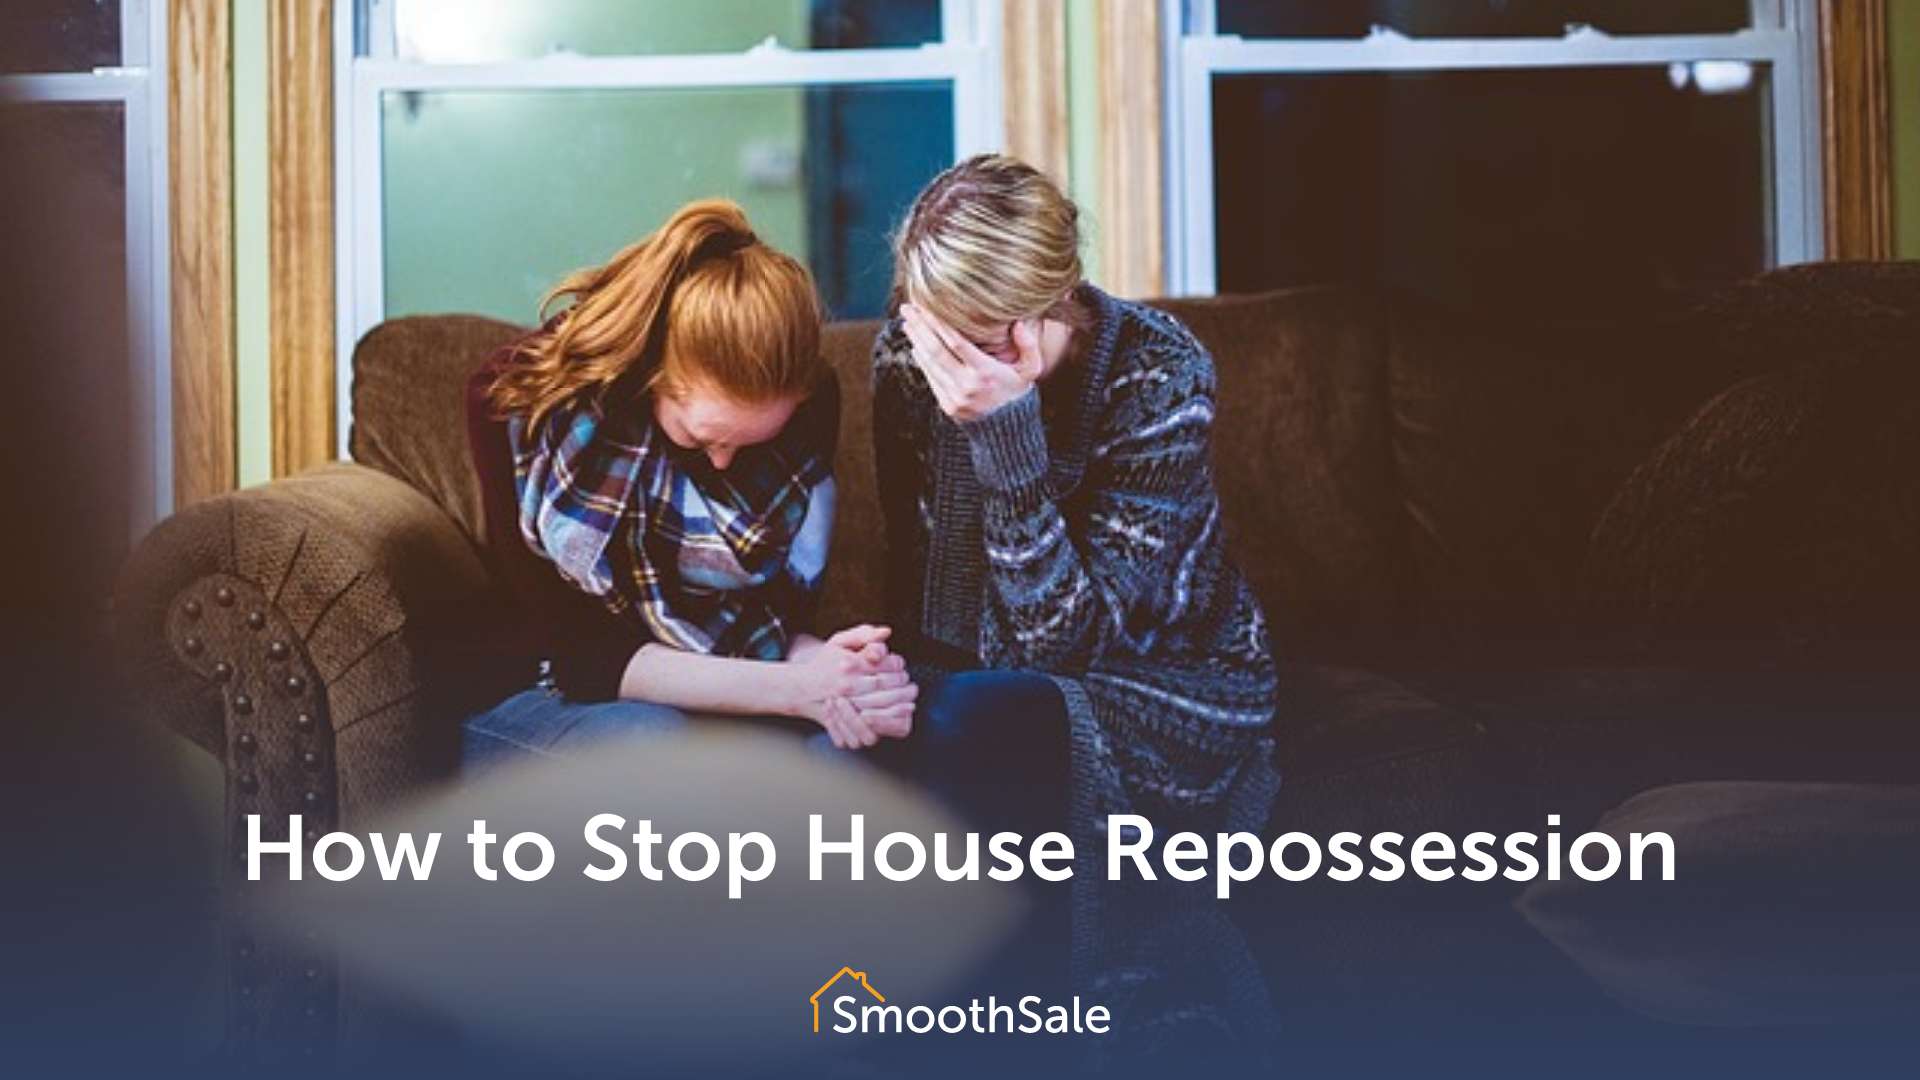 Watch our web story: Tips on how to Stop Repossession